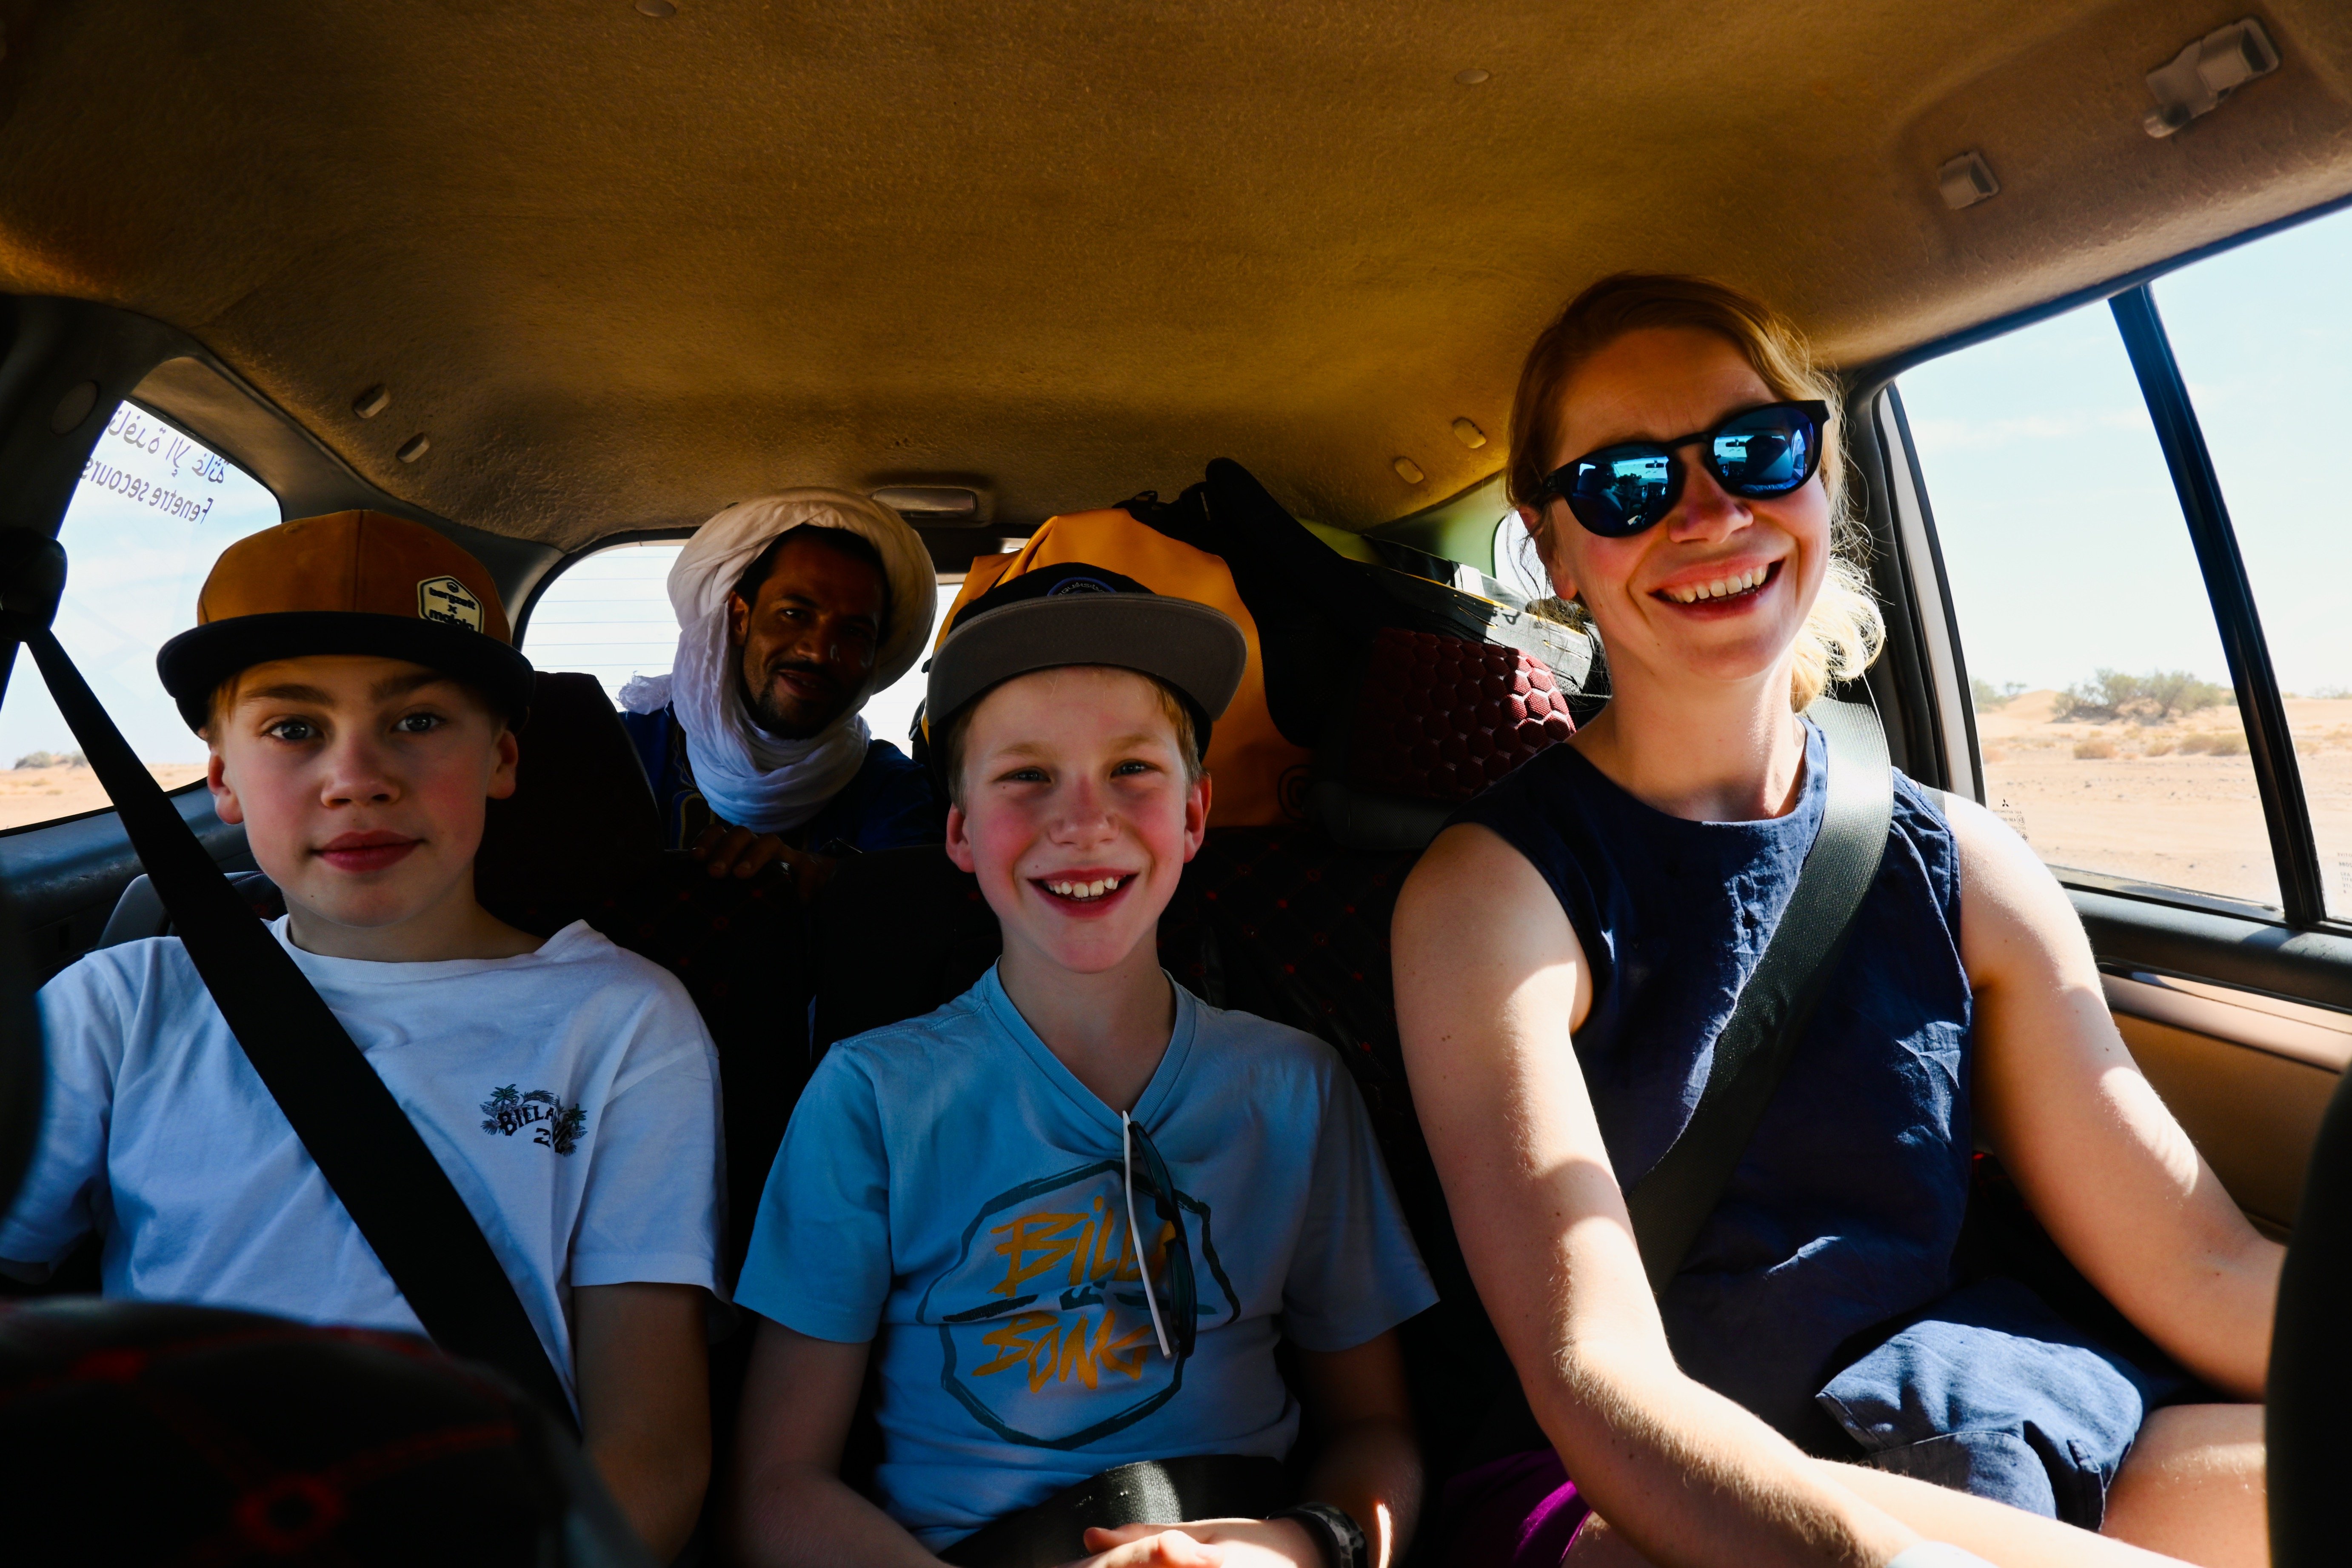 10 years tour operator For Family Reisen - Individual rental car trip for families in Morocco - Fravely